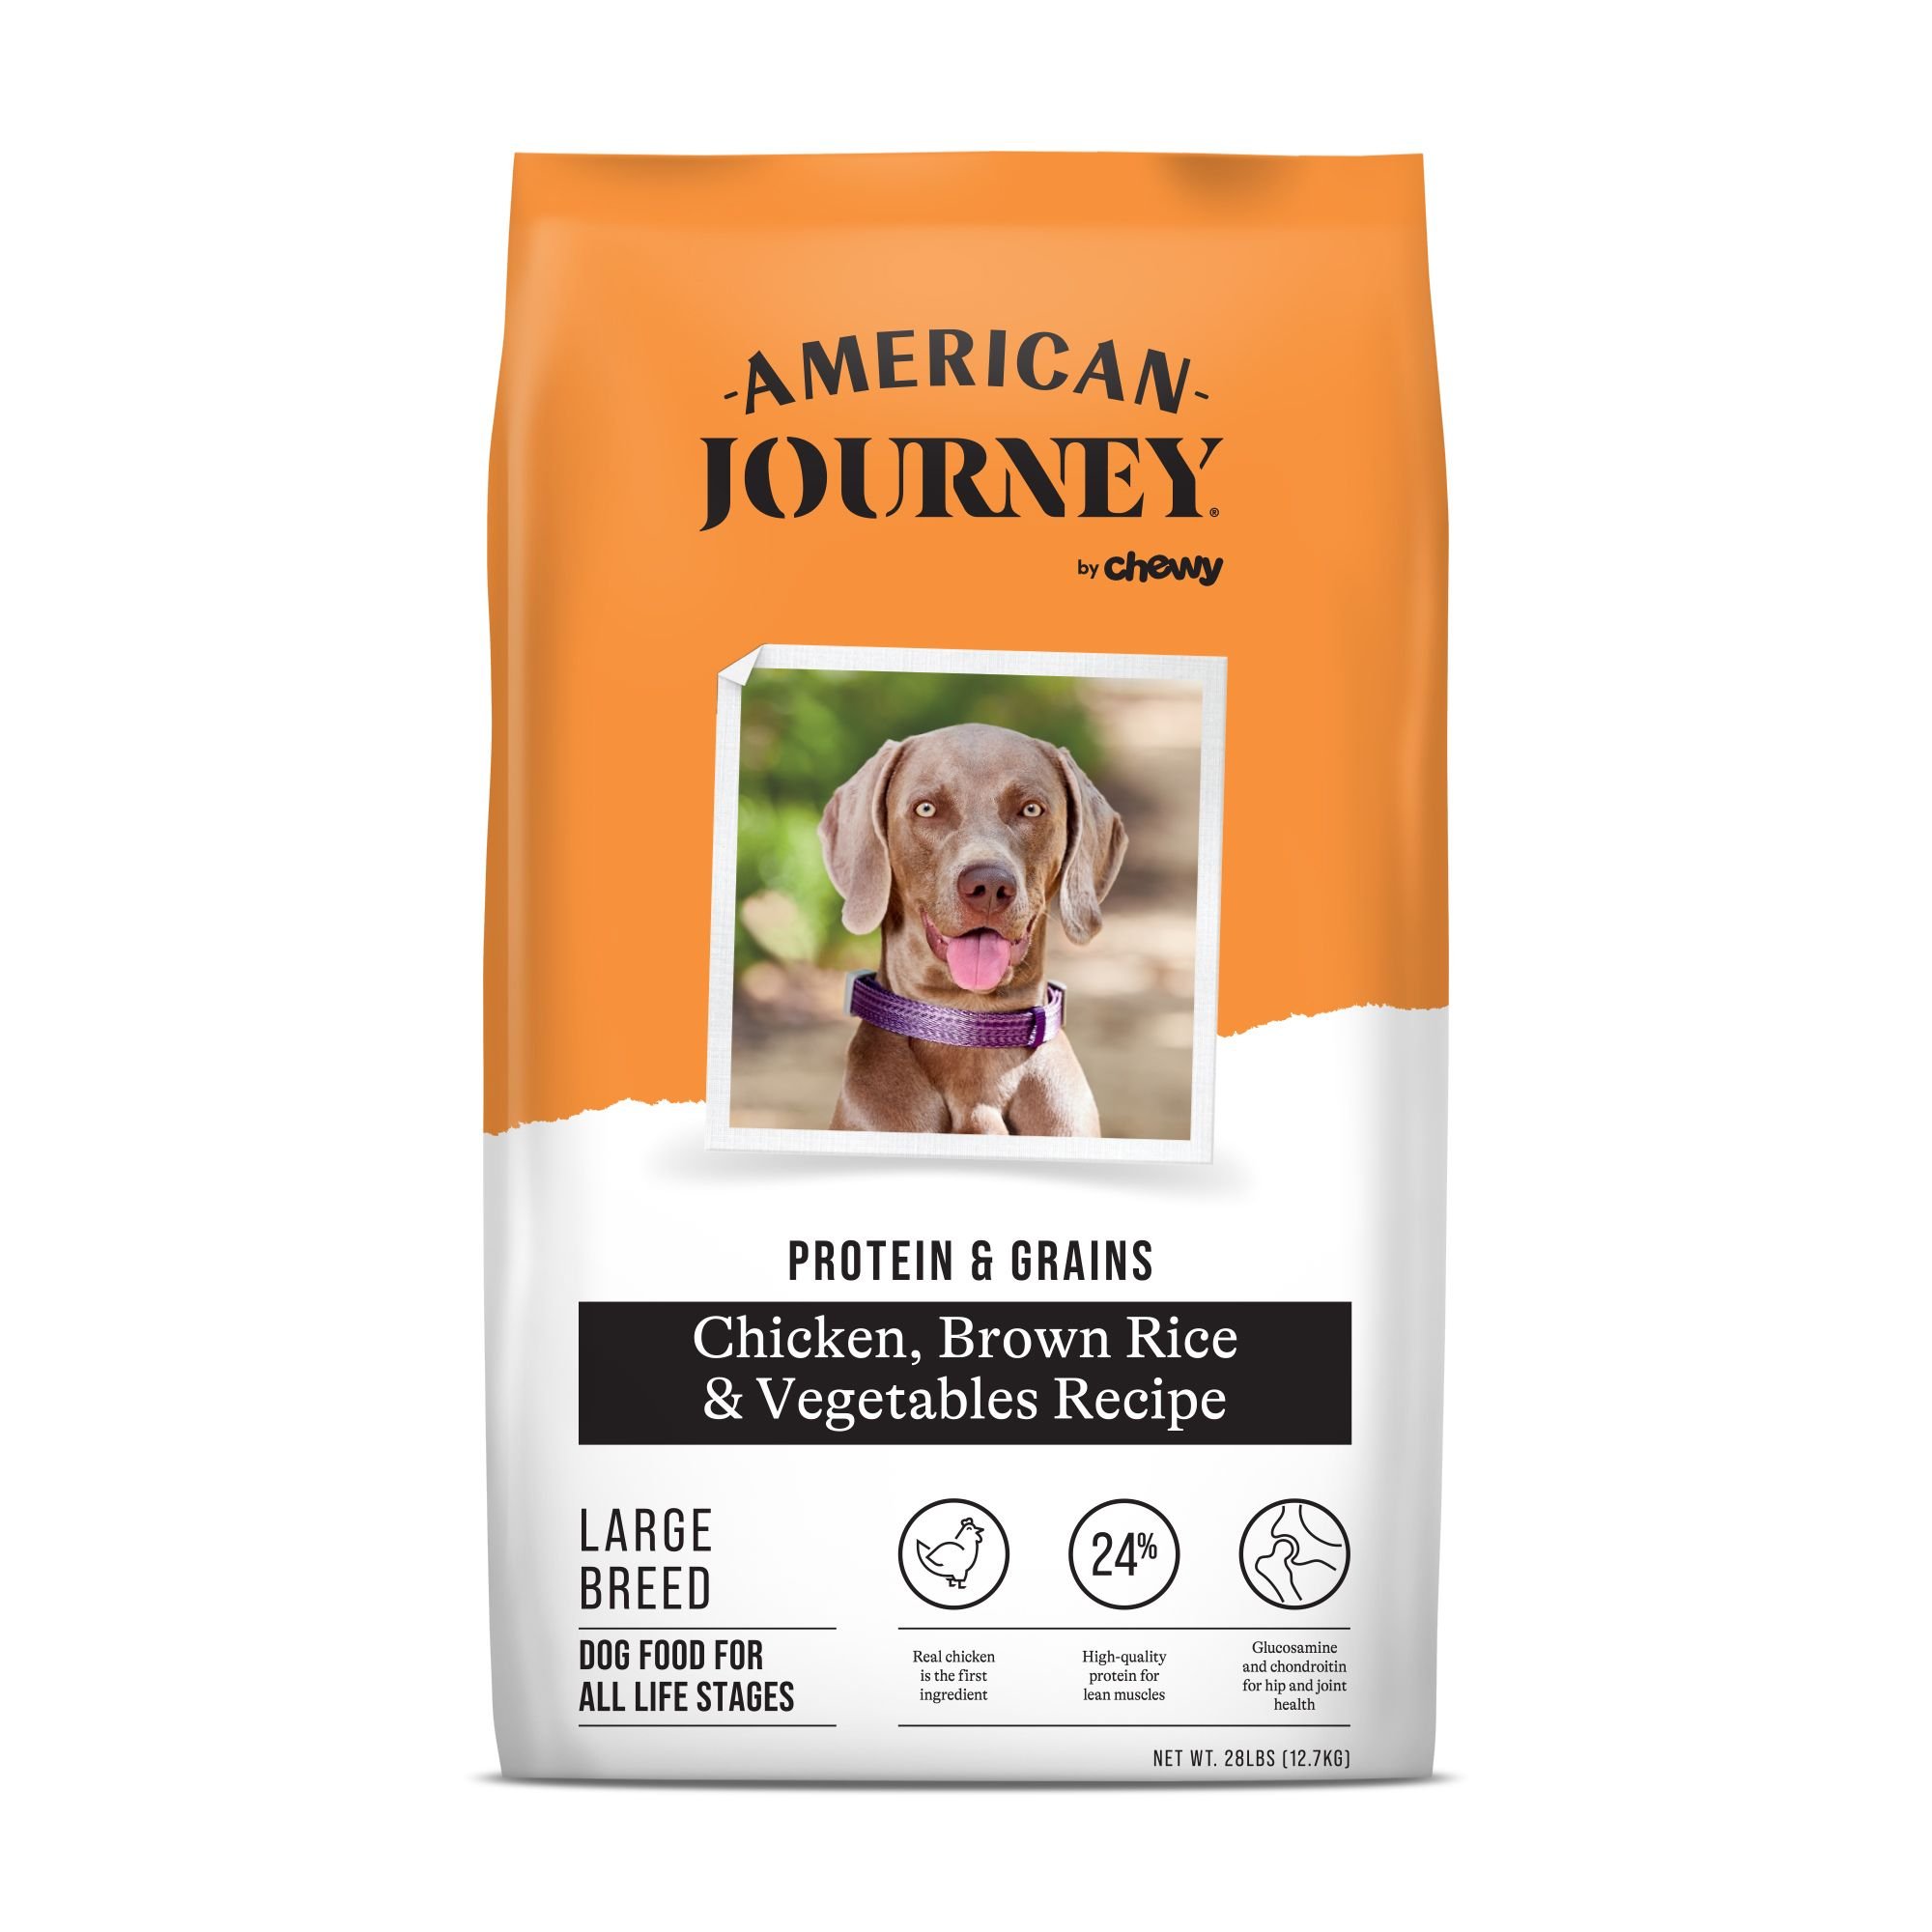 AMERICAN JOURNEY Protein & Grains Large Breed Chicken, Brown Rice ...